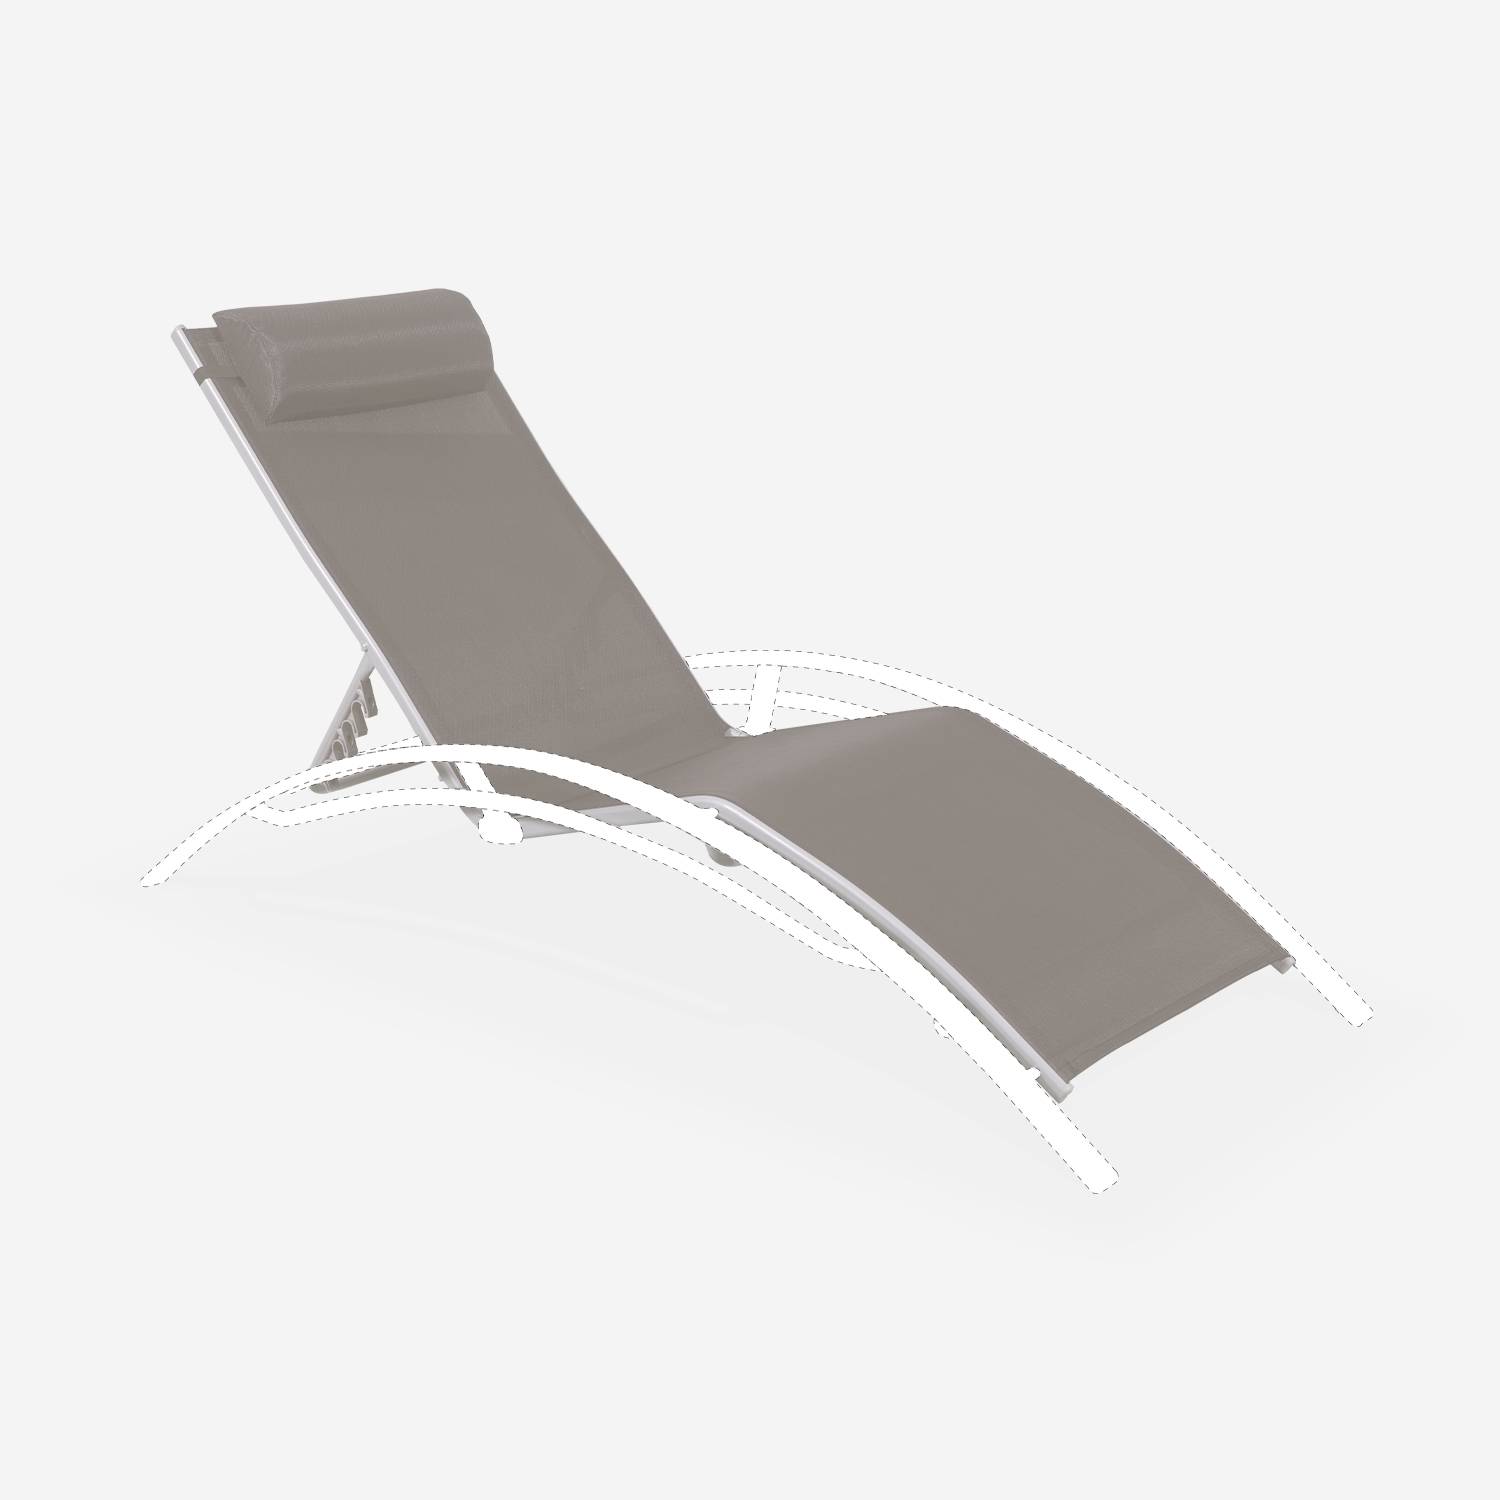 Replacement textilene fabric for Louisa sun loungers - White frame, Beige-Brown textilene Photo1